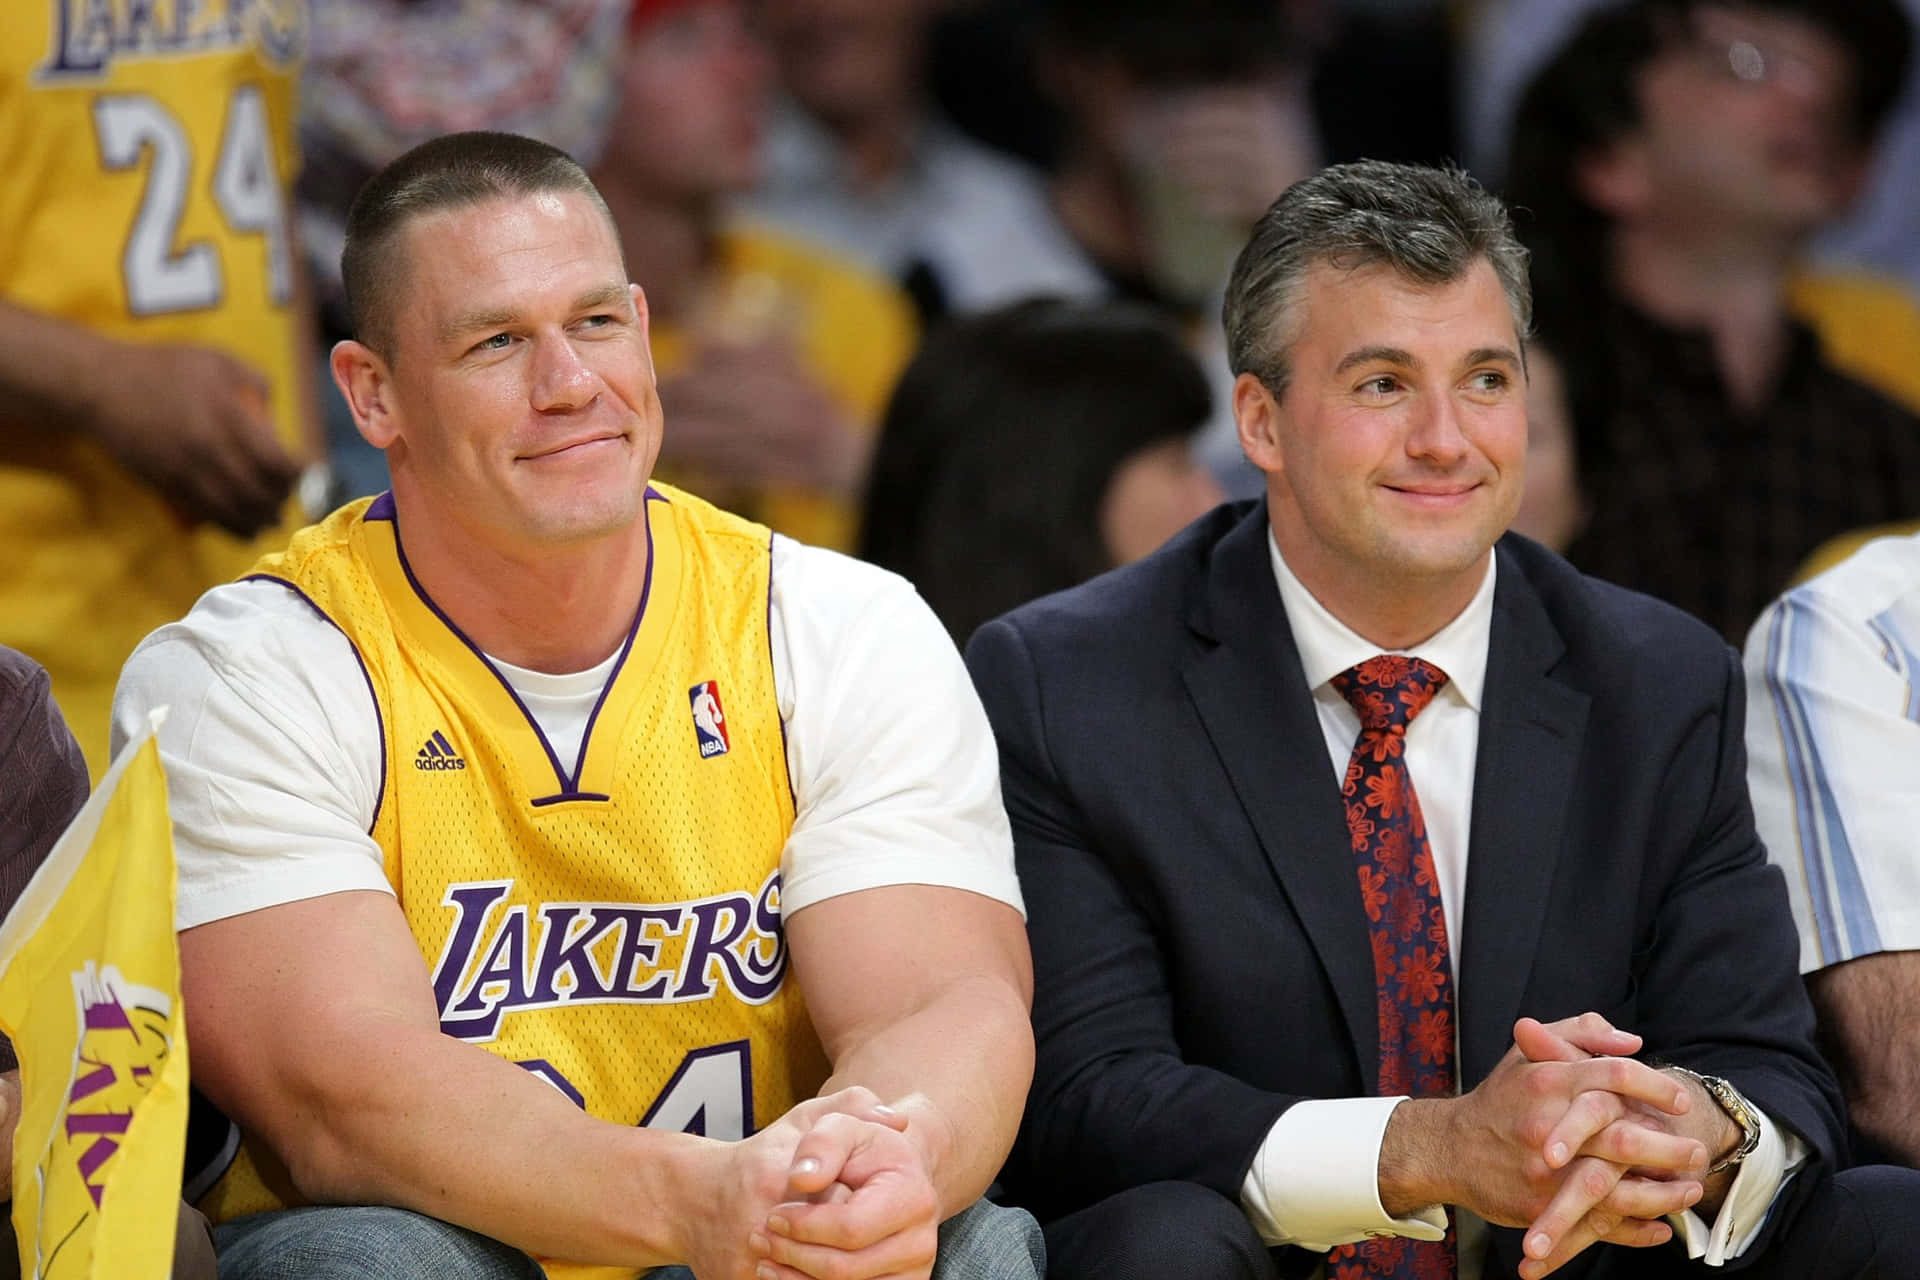 Shane Mcmahon Watching A Lakers Game With John Cena Background